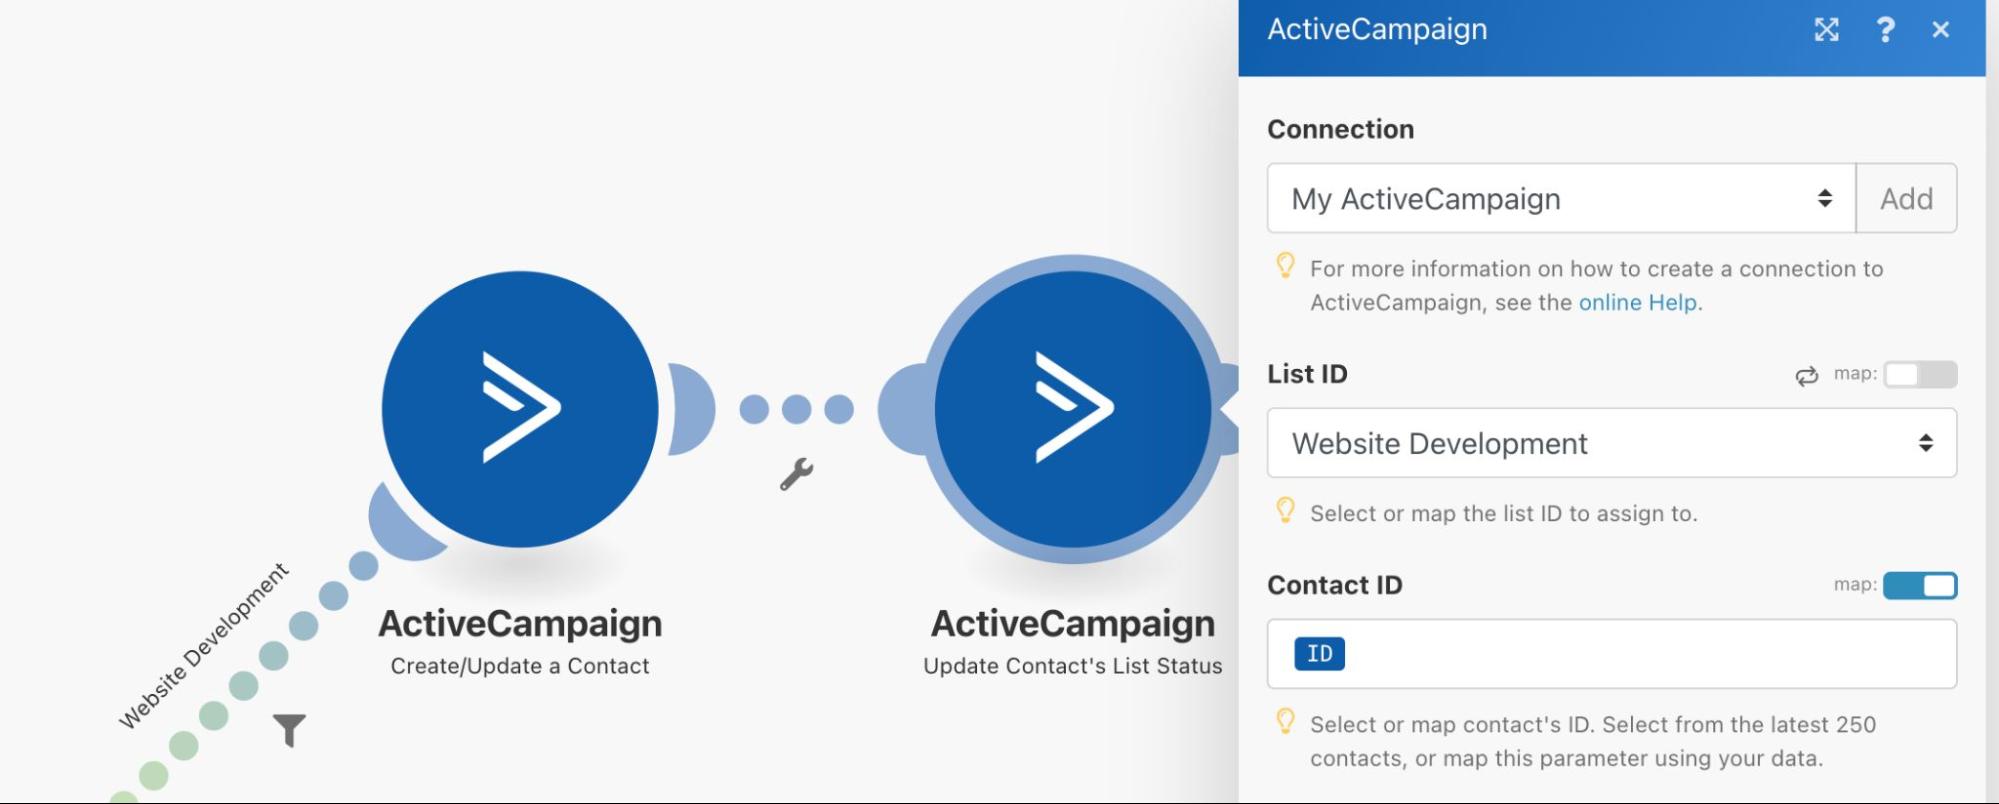 integromat-activecampaign-add-contact-to-list-module